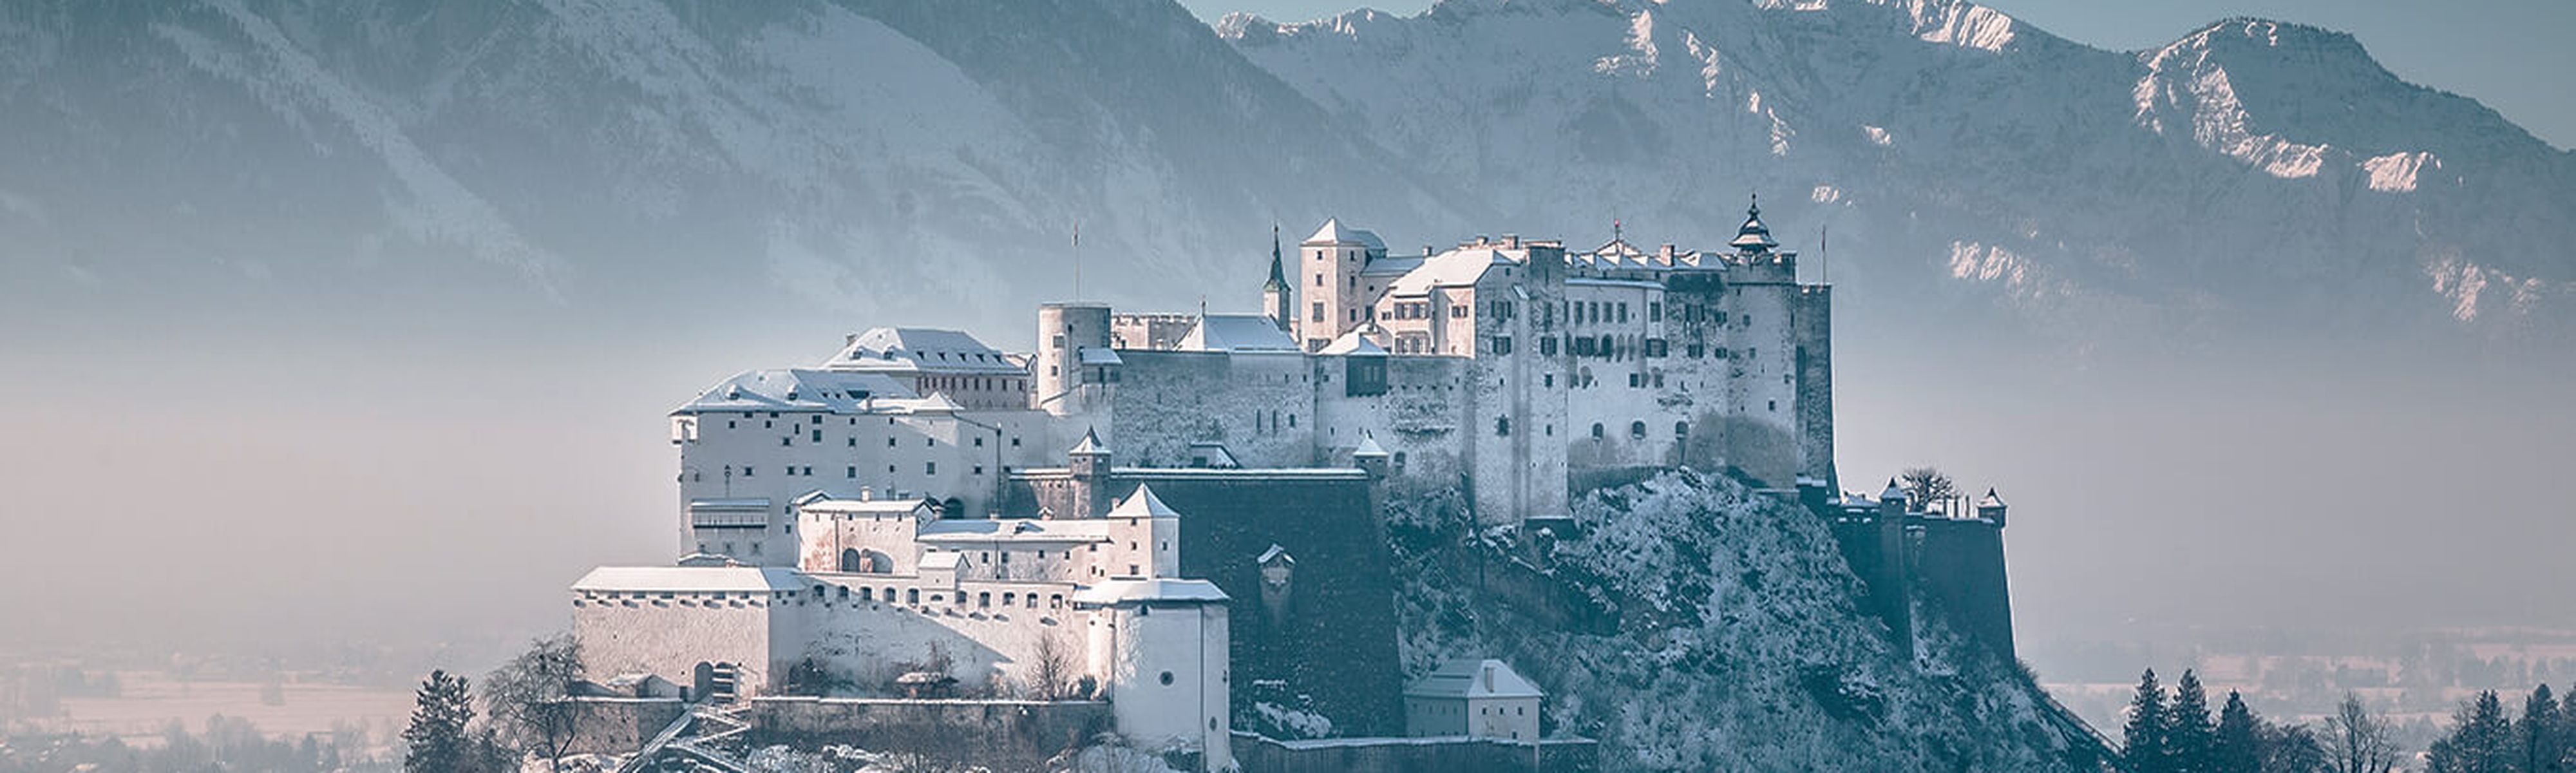 hohensalzburg castle in austria surrounded by snow capped mountains